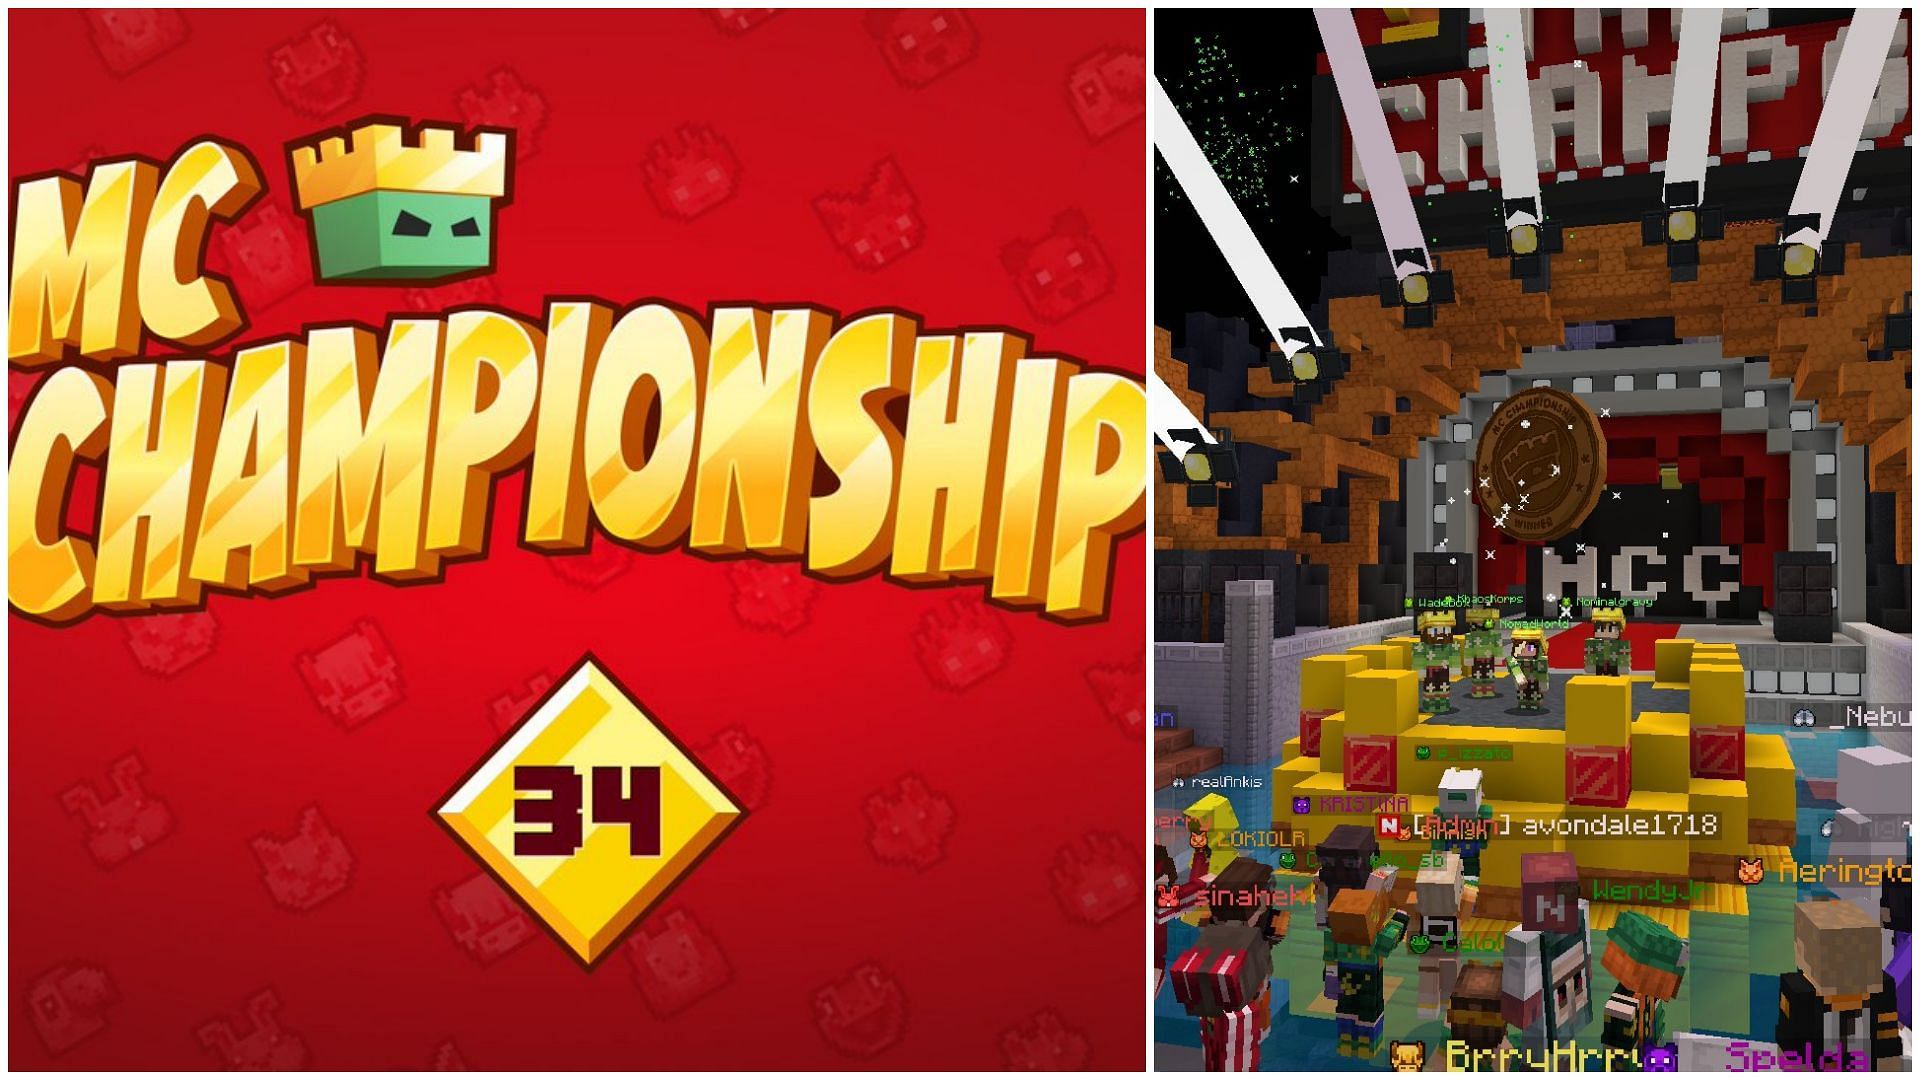 Minecraft Championship is back with it